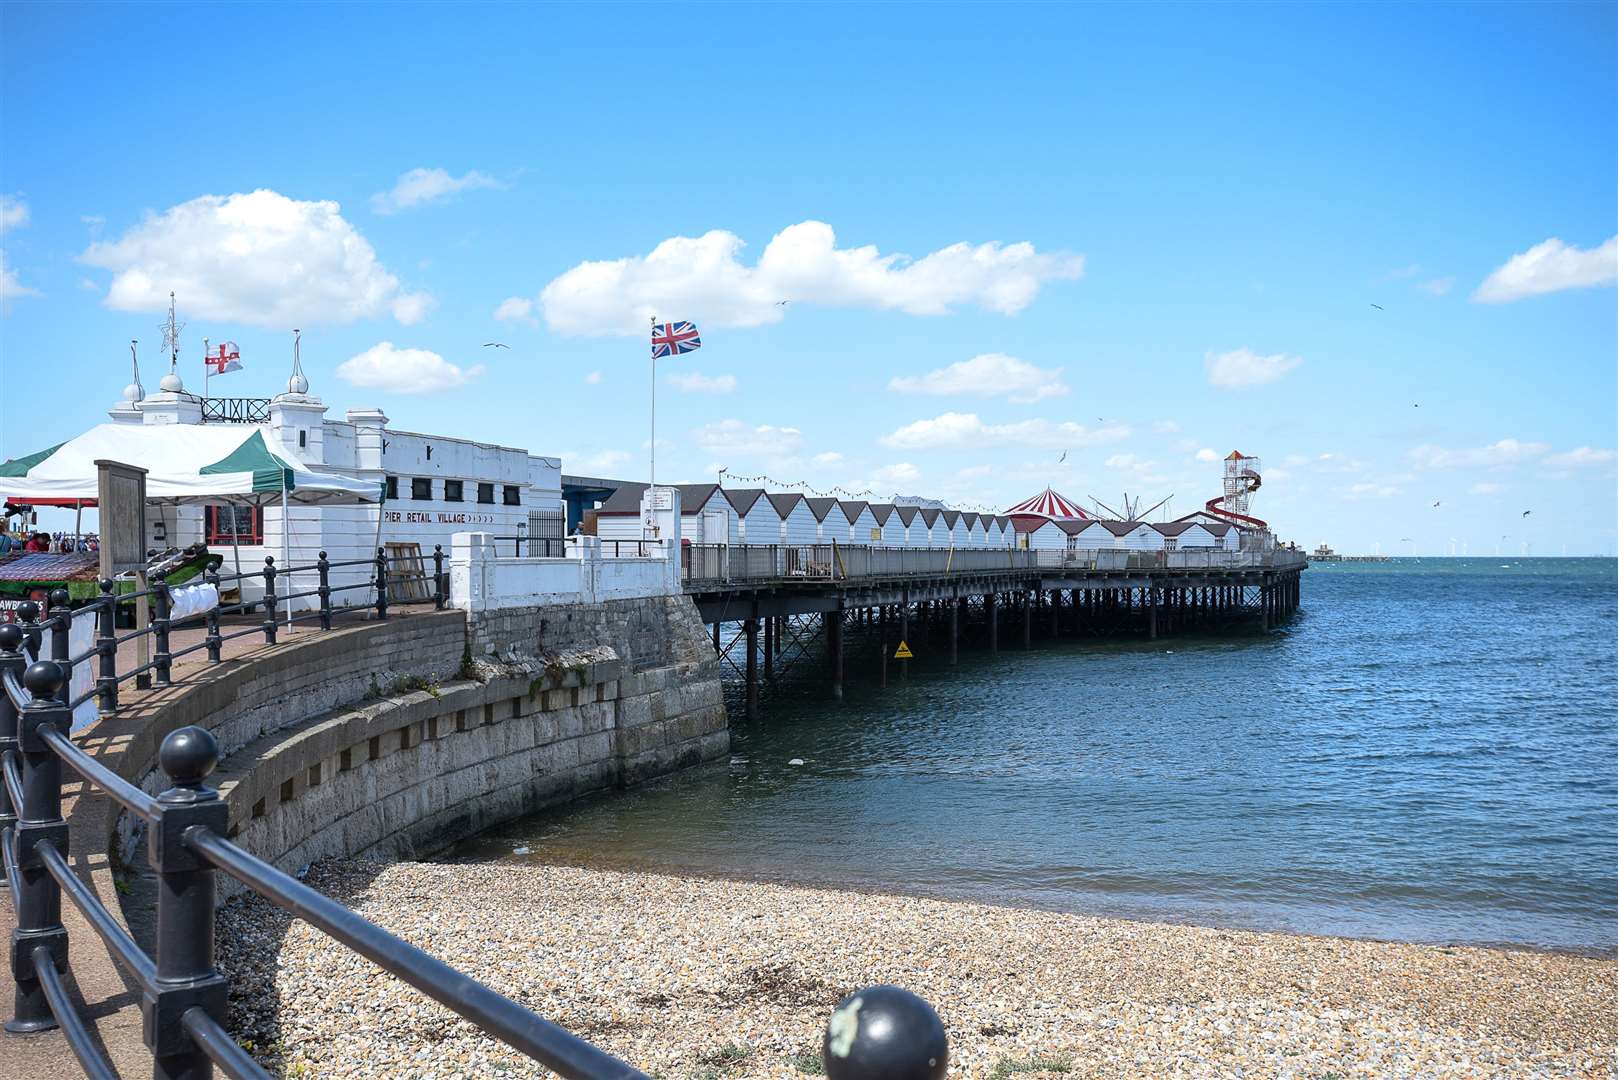 The town's pier is a popular destination for tourists